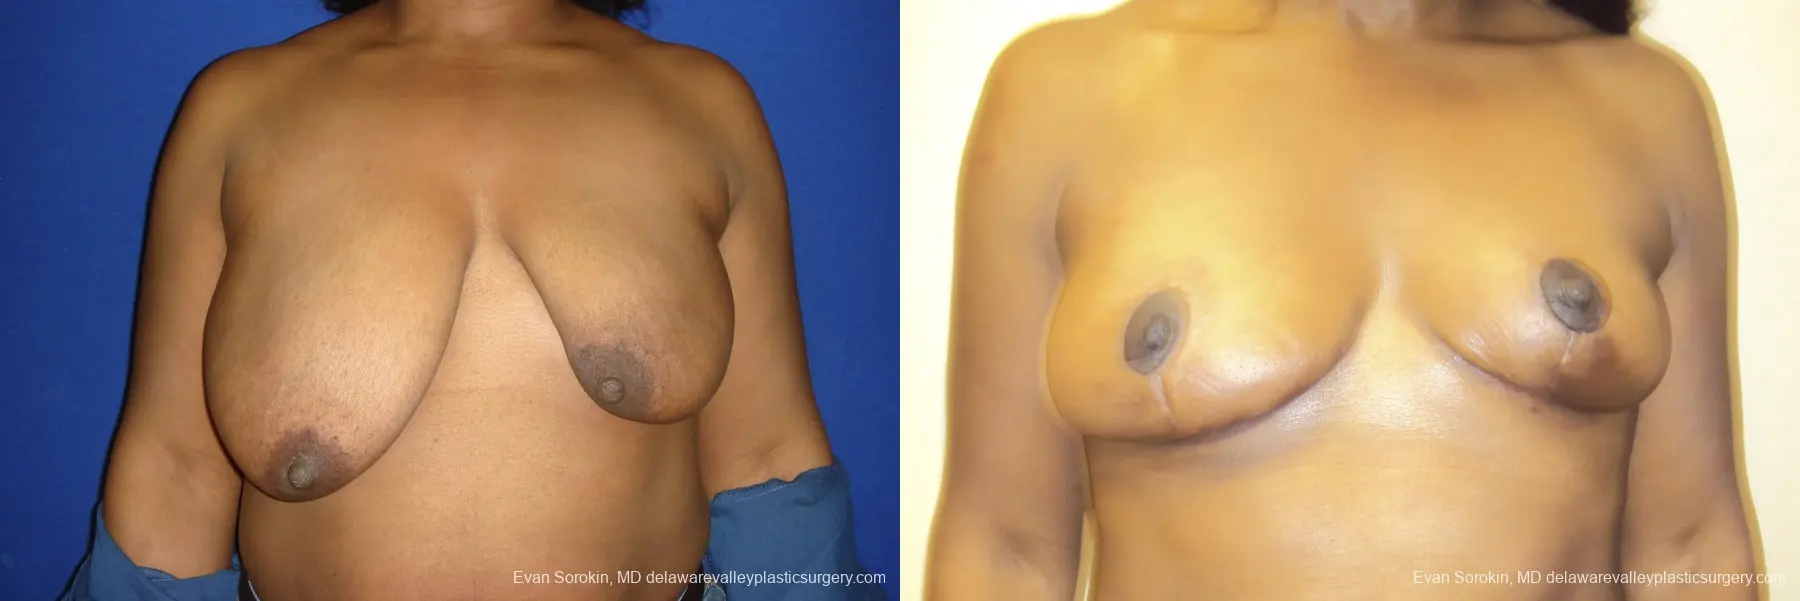 Breast Lift: Patient 2 - Before and After 1